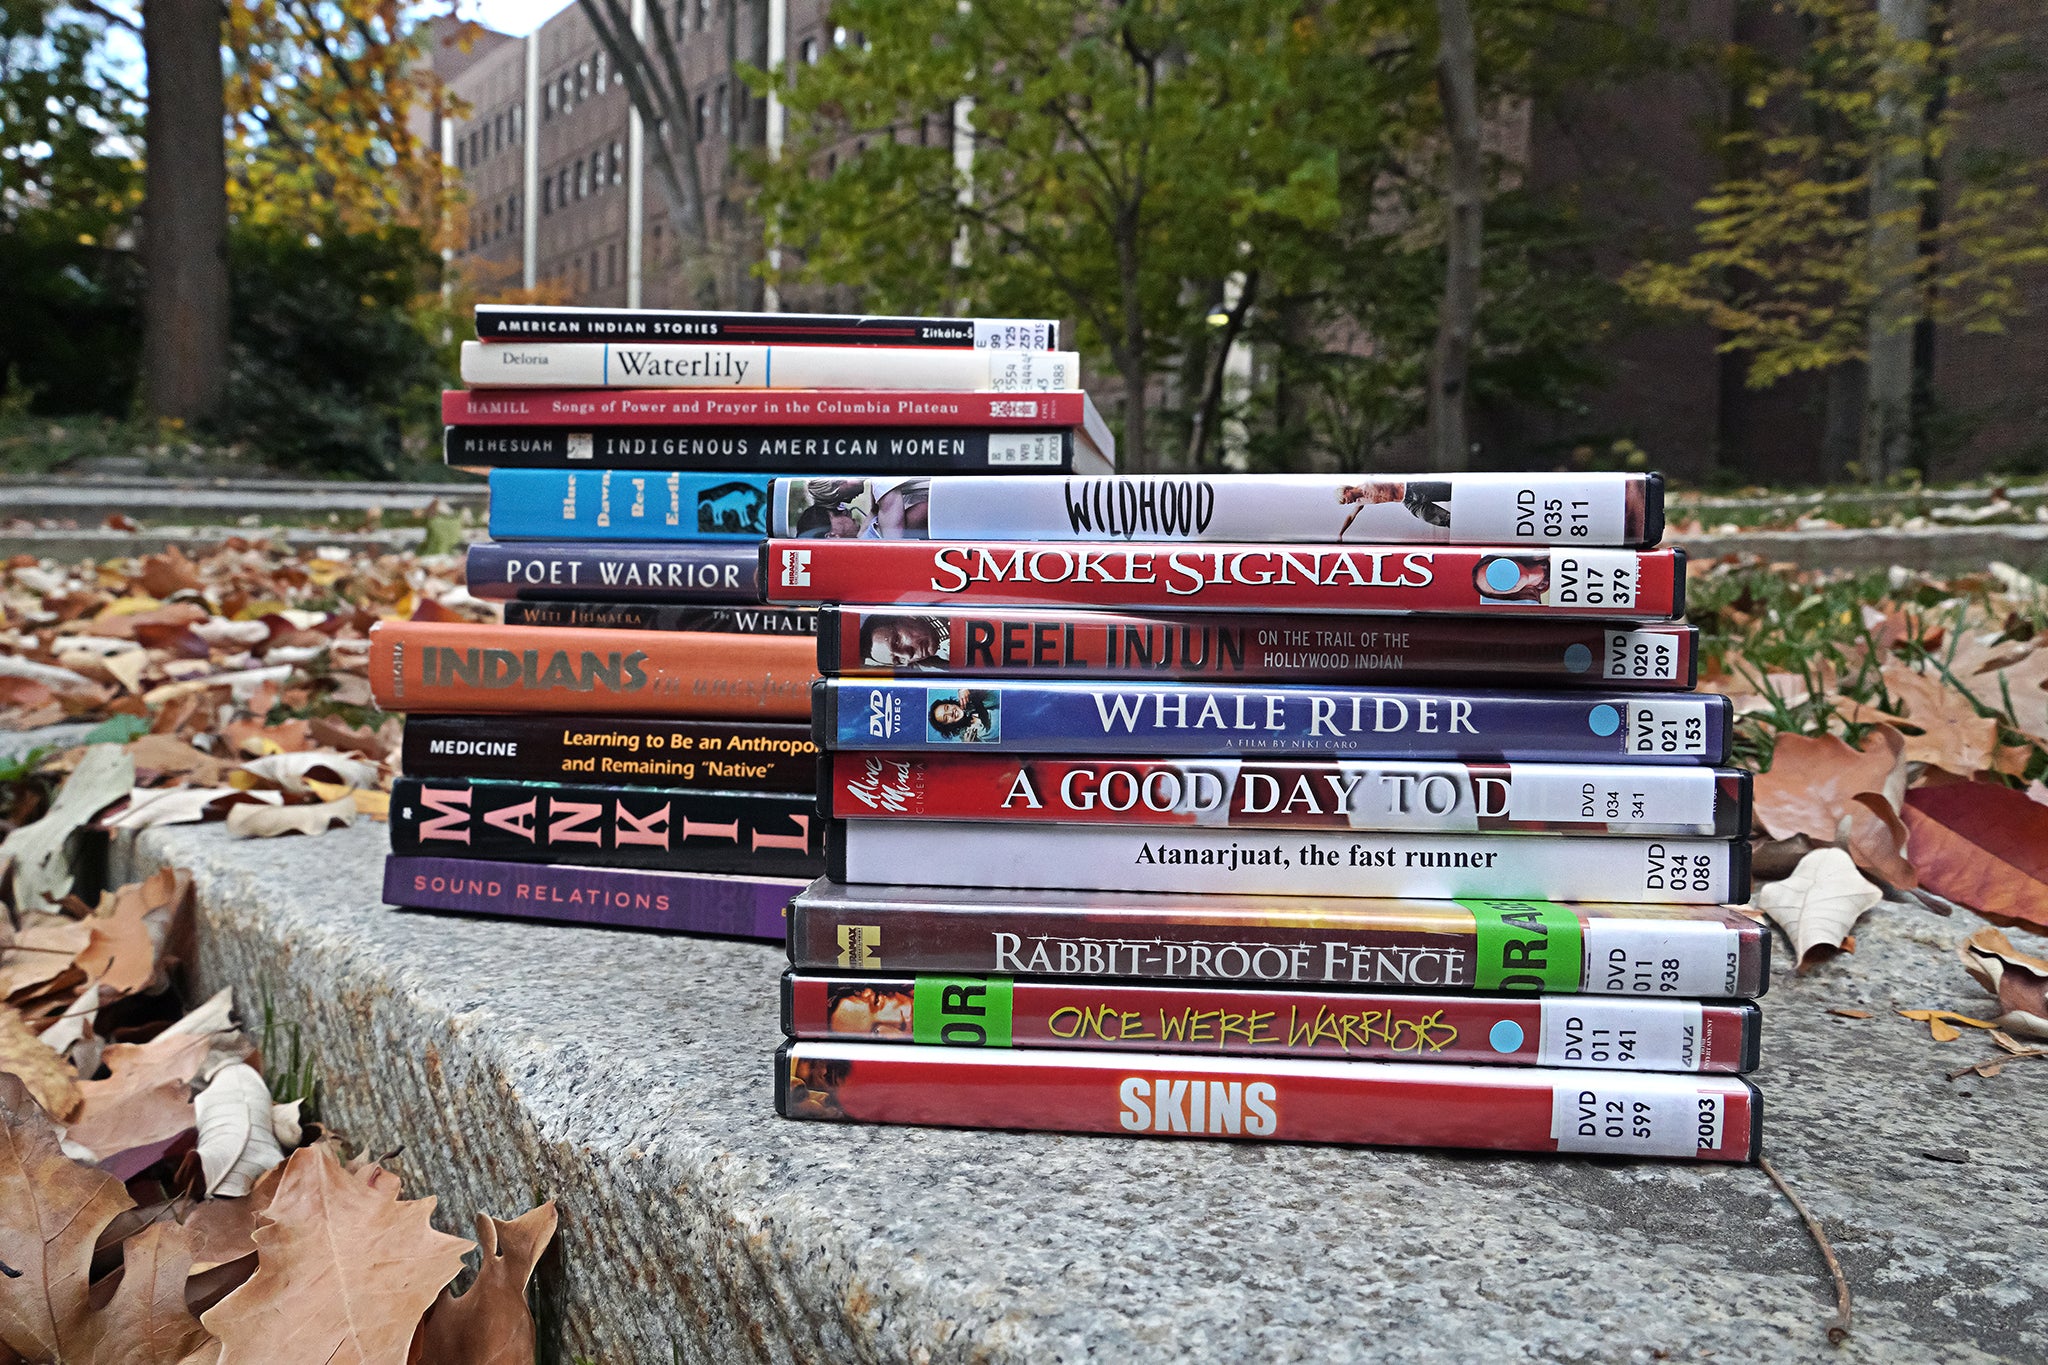 A multicolored stack of books sits next to a stack of DVDs on a rock surrounded by fallen leaves. A few of the titles include books American Indian Stories, Warrior Poet, and Sound Relations; and DVDs Smoke Signals, Rabbit-Proof Fence, and Skins.